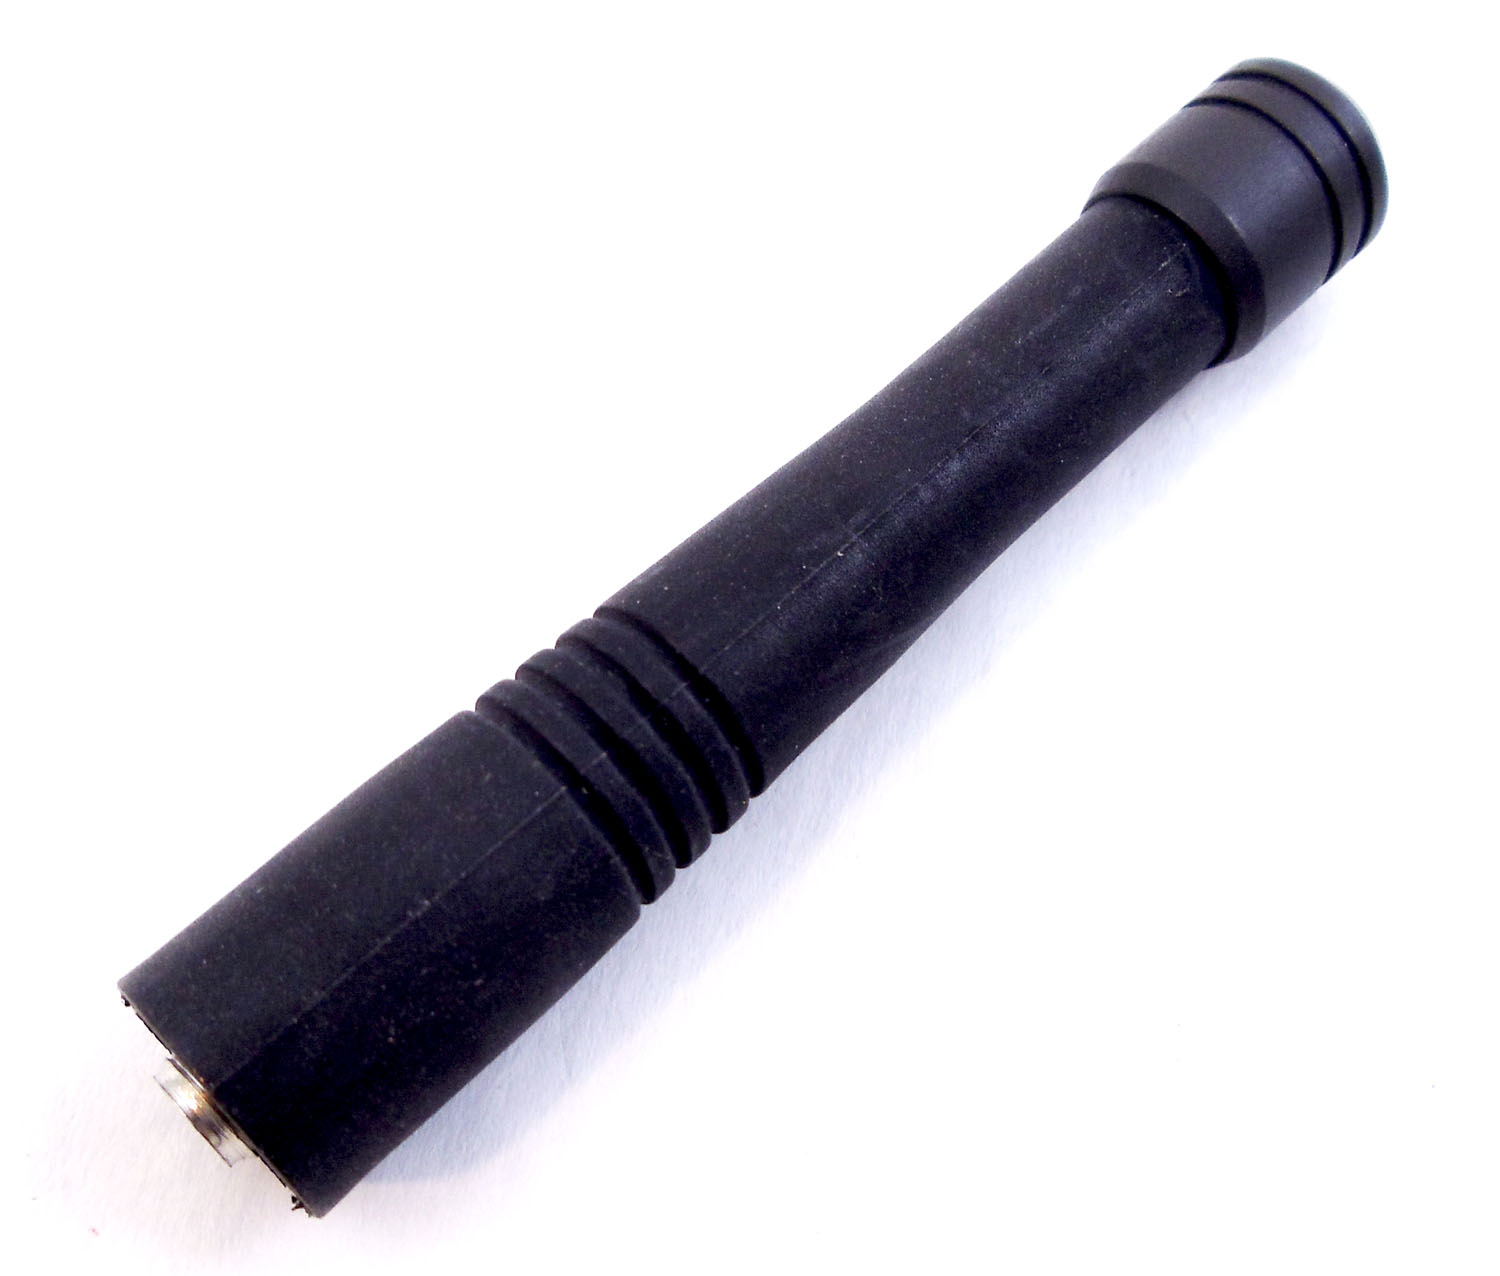 Midland - G30 3" Rubber Replacement Antenna